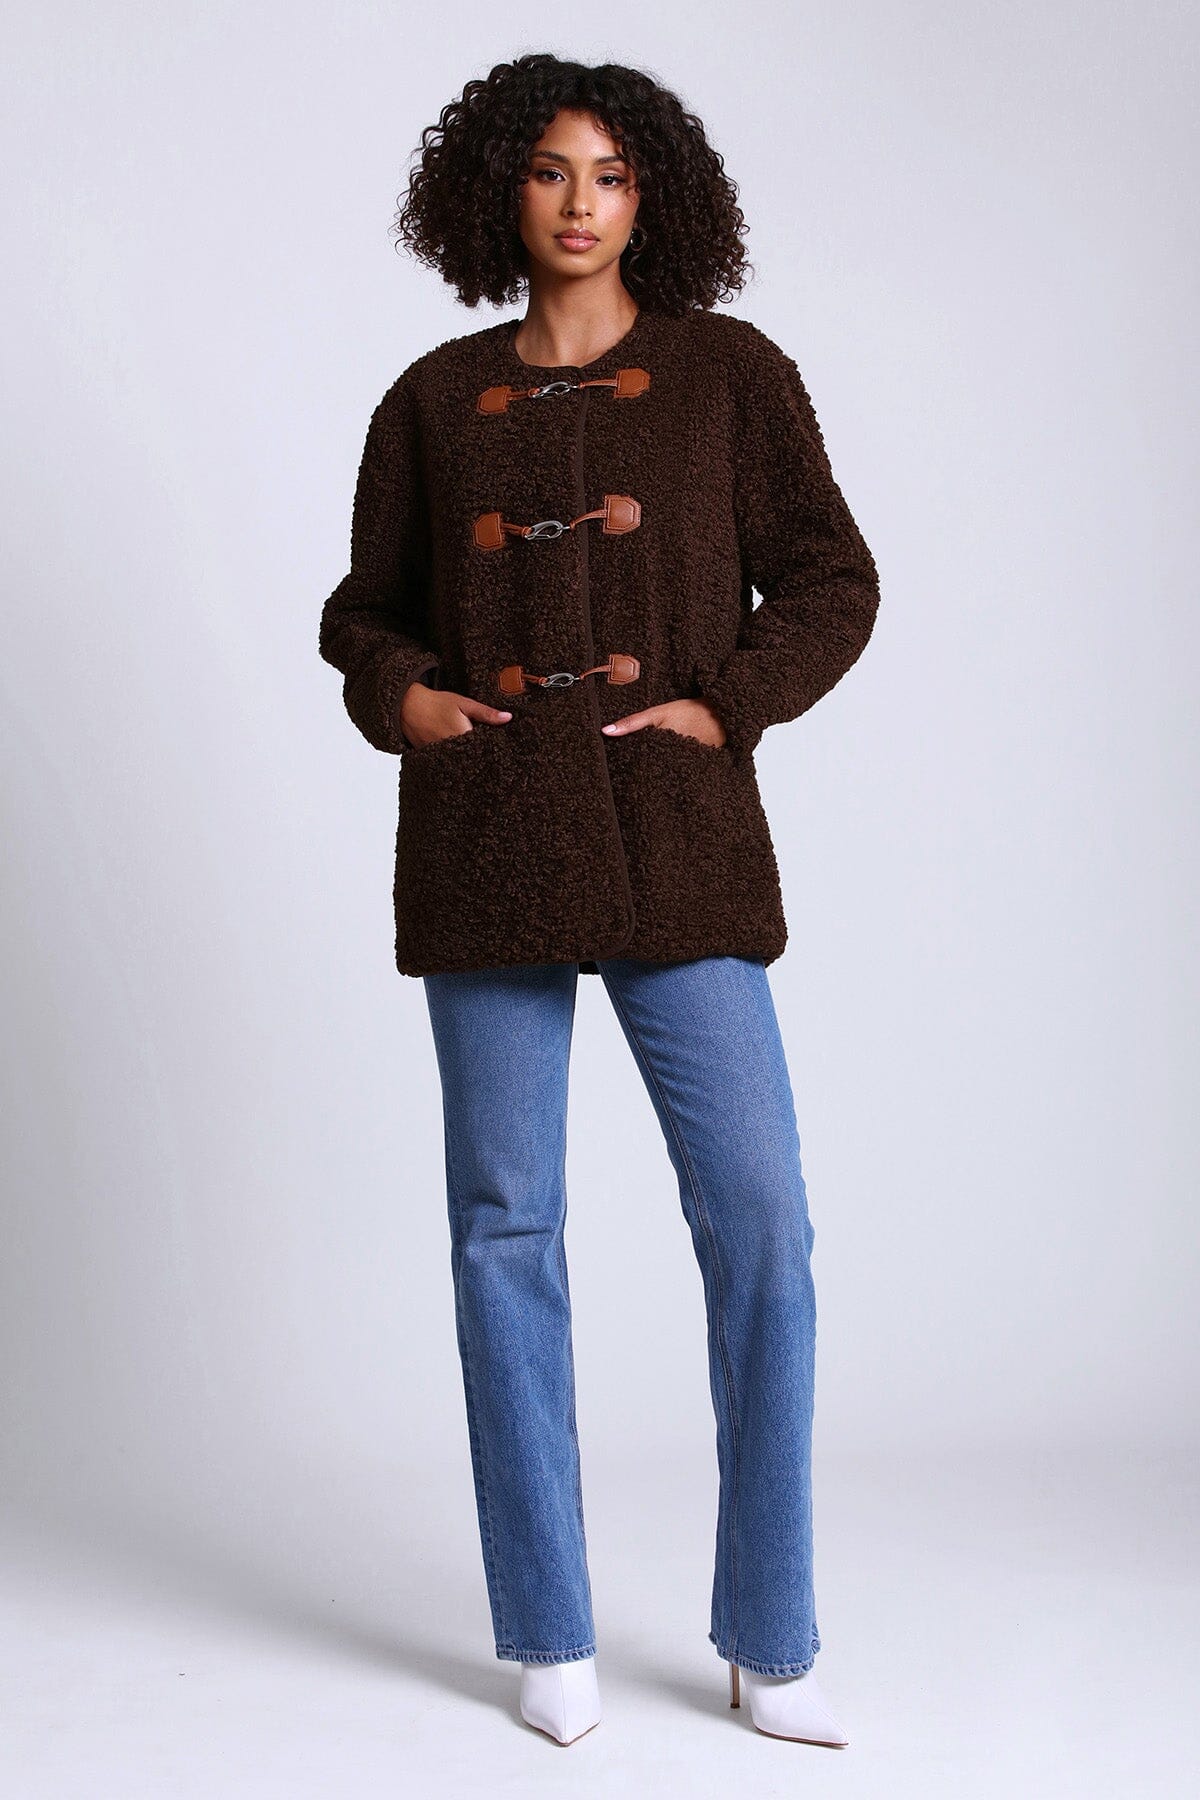 Chocolate brown faux shearling toggle jacket coat - women's figure flattering cozy fall 2023 outerwear by Avec Les Filles